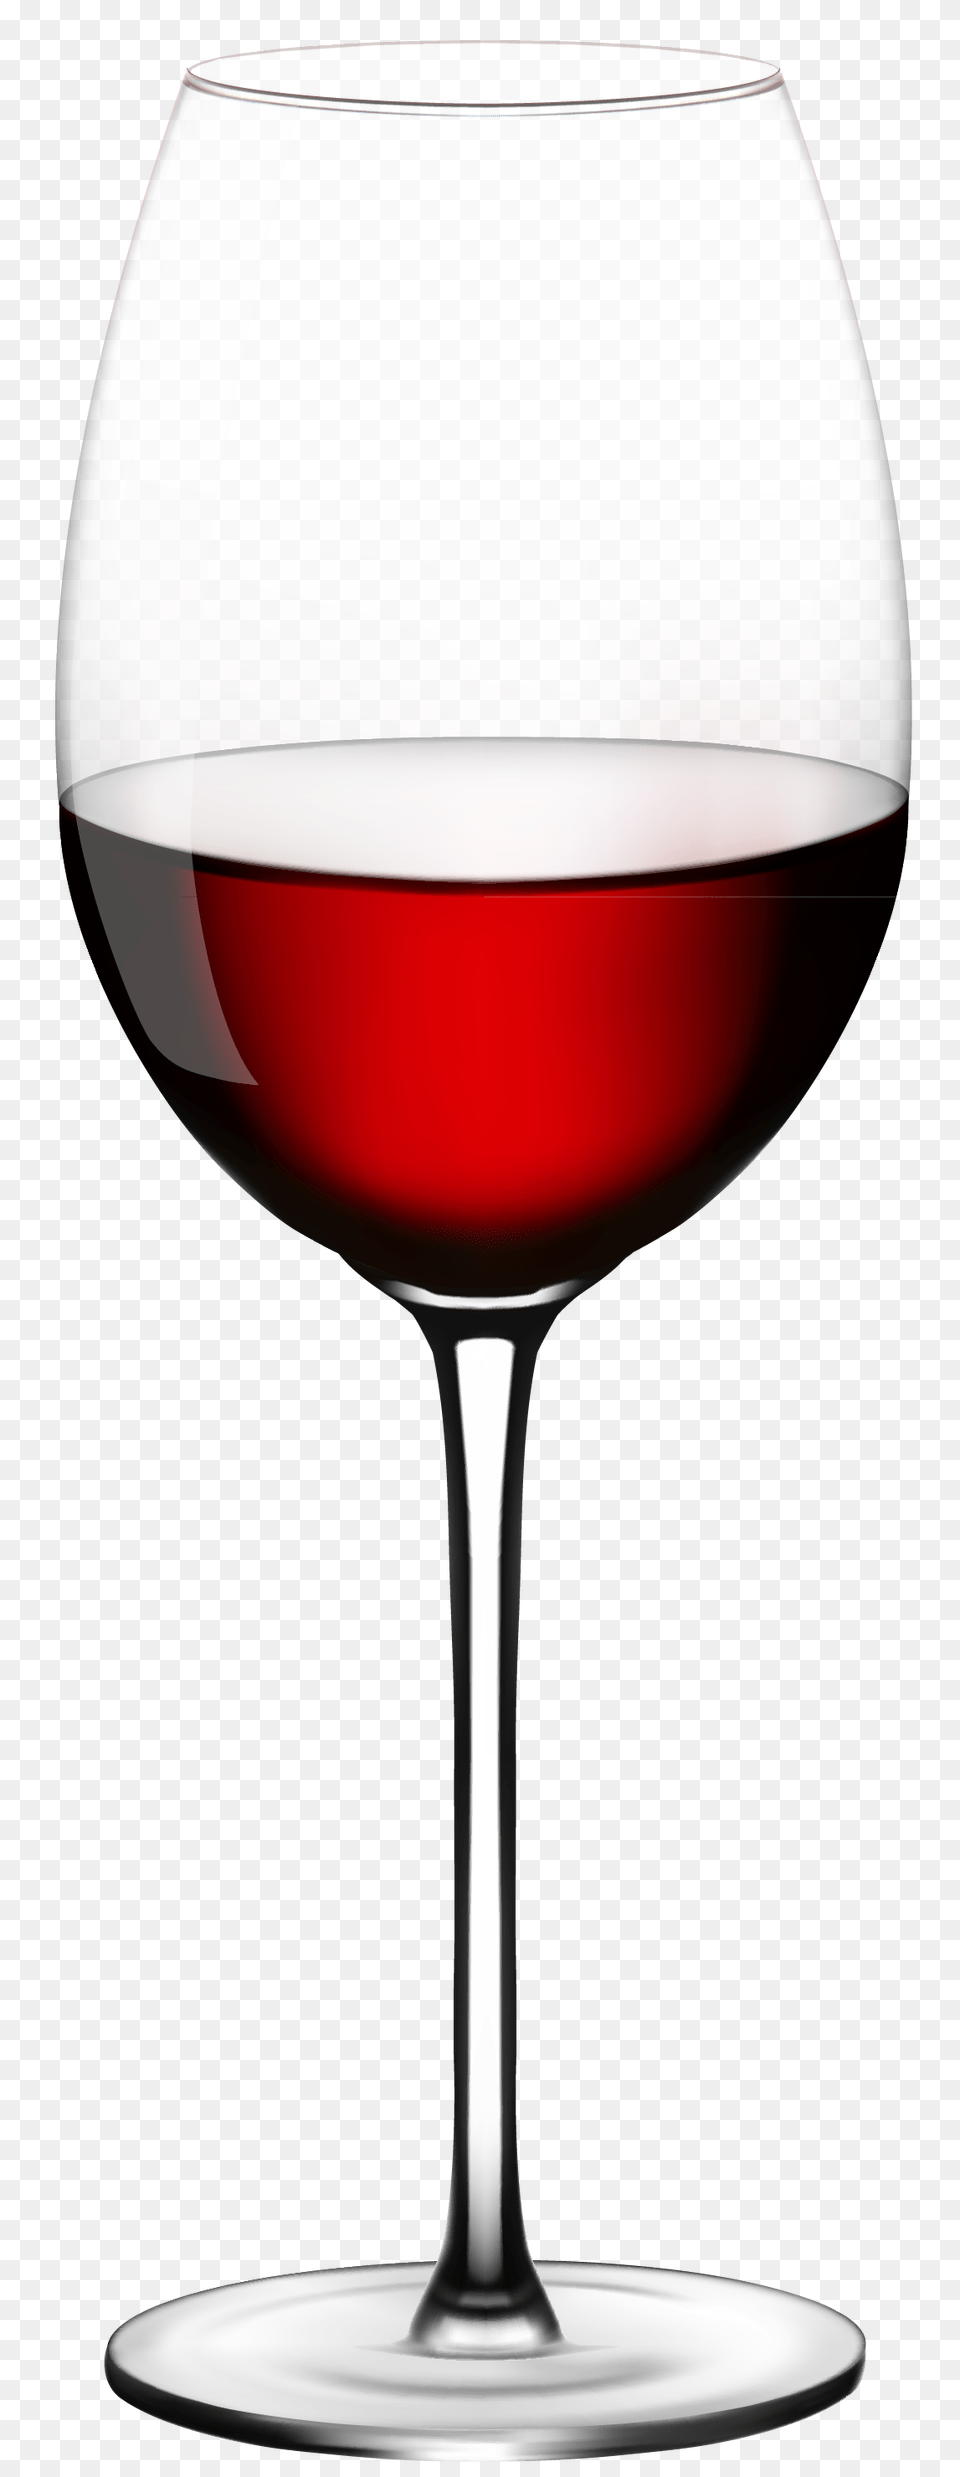 Charity Golf Wine Glass, Alcohol, Red Wine, Liquor, Beverage Png Image